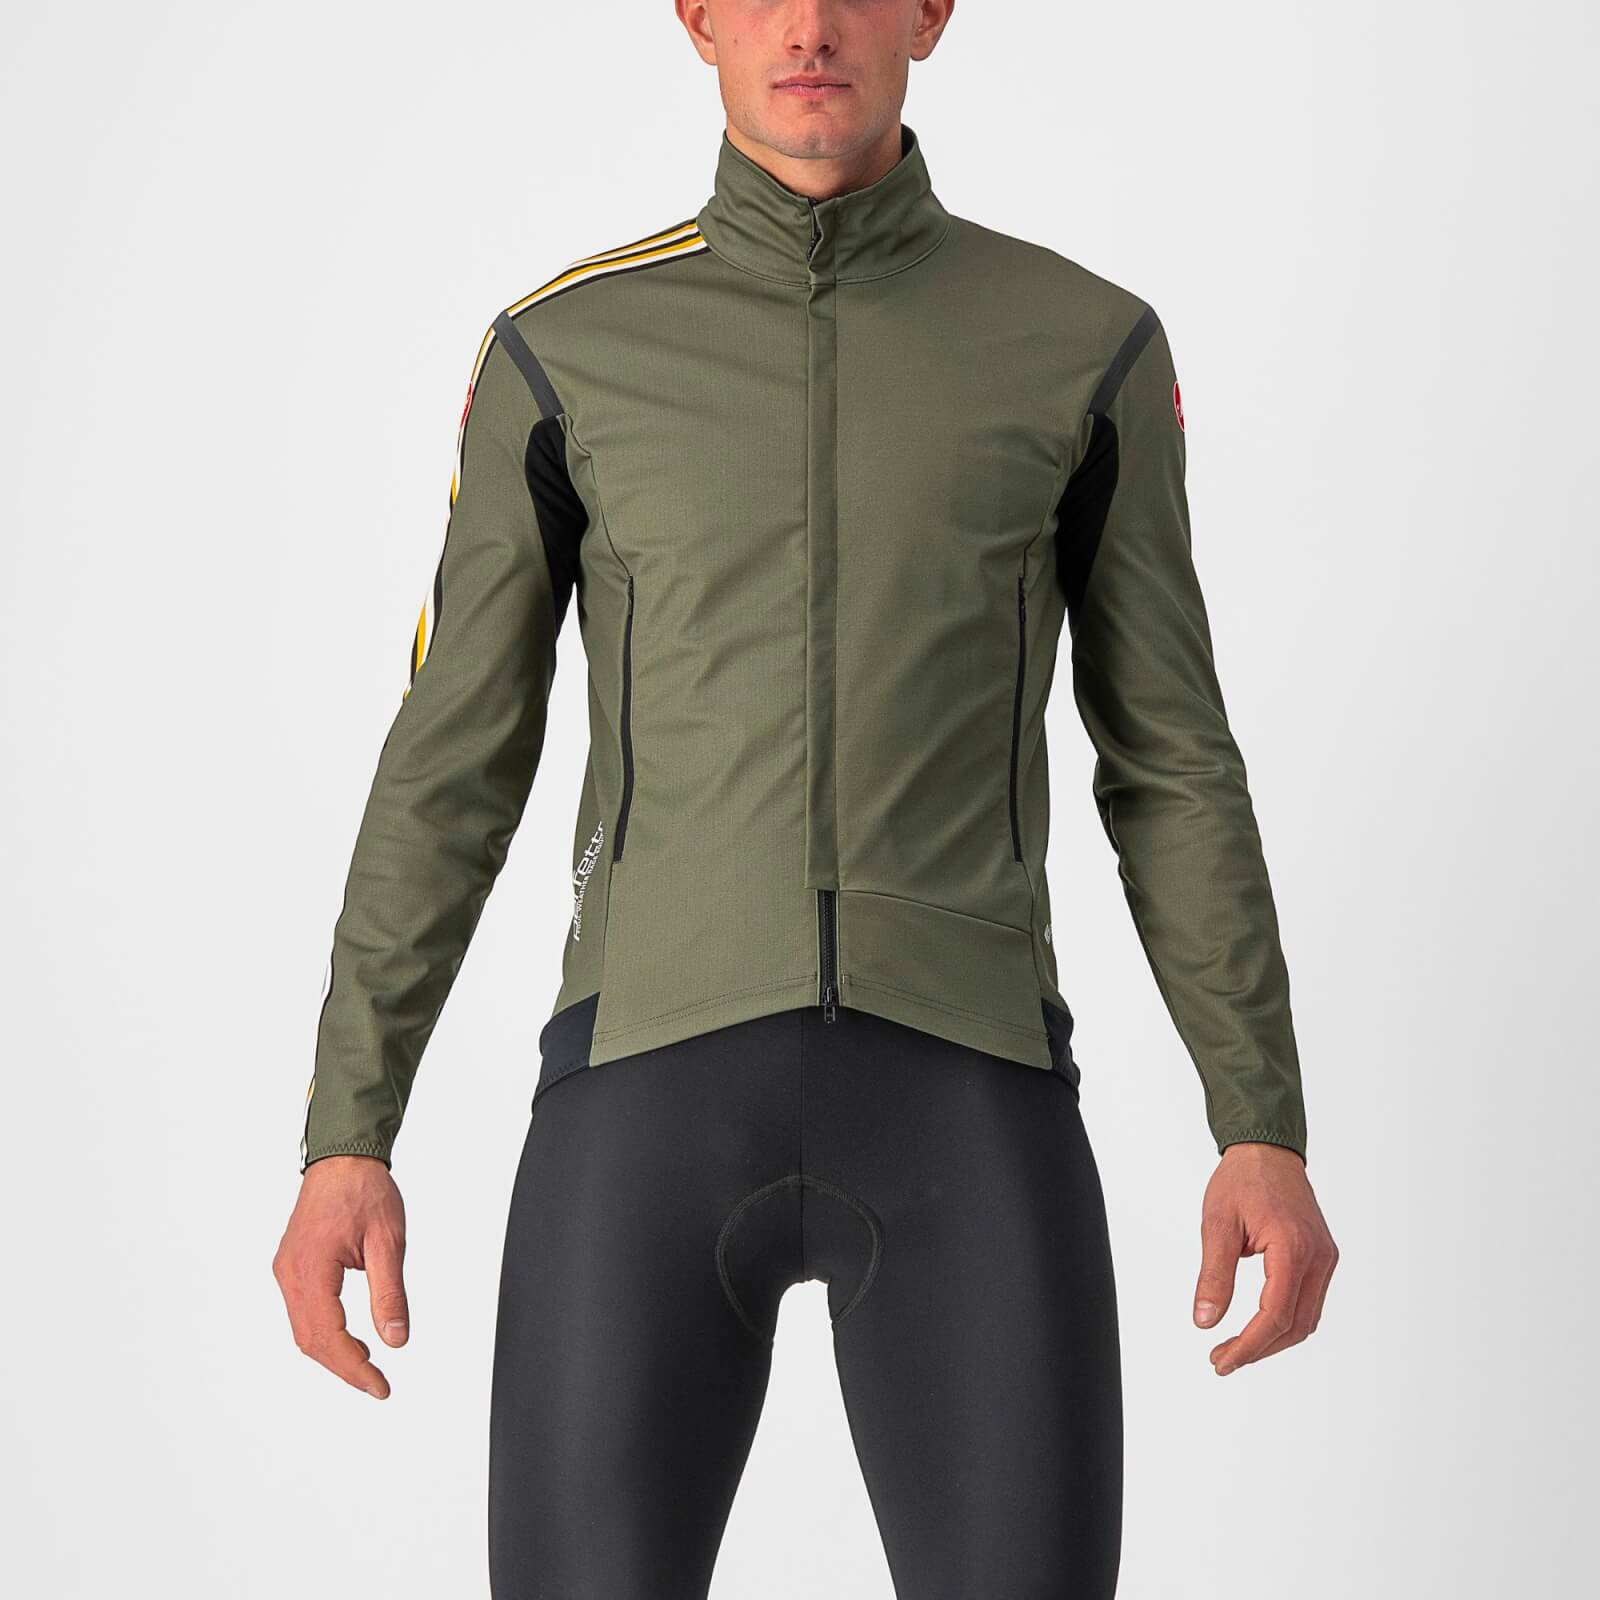 Castelli Unlimited Perfetto Ros 2 Jacket - L - Military Green/Goldenrod